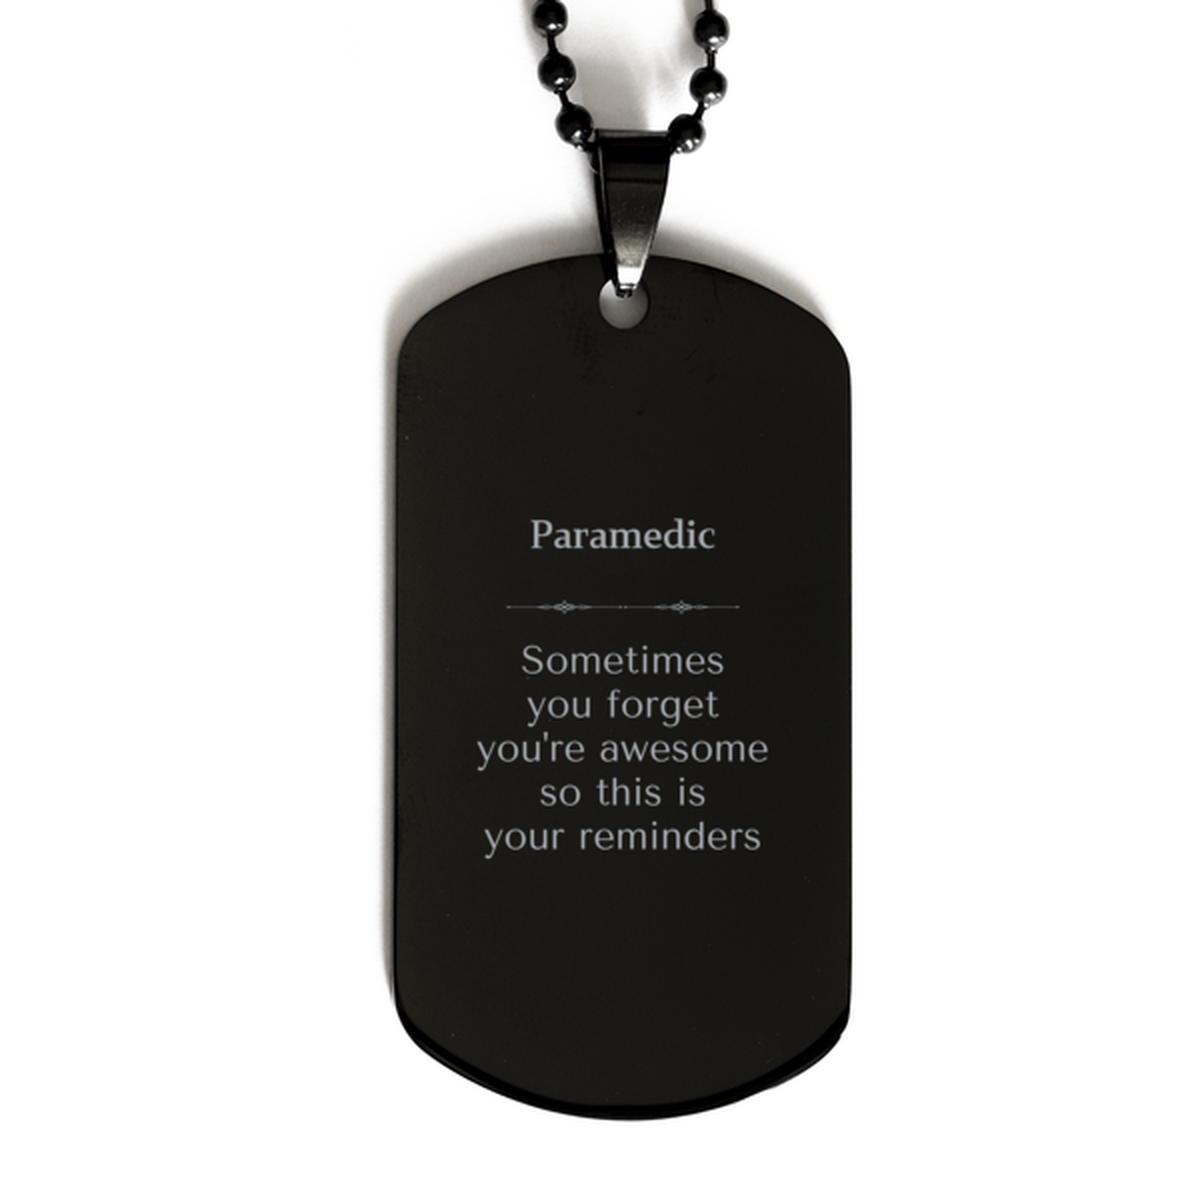 Sentimental Paramedic Black Dog Tag, Paramedic Sometimes you forget you're awesome so this is your reminders, Graduation Christmas Birthday Gifts for Paramedic, Men, Women, Coworkers